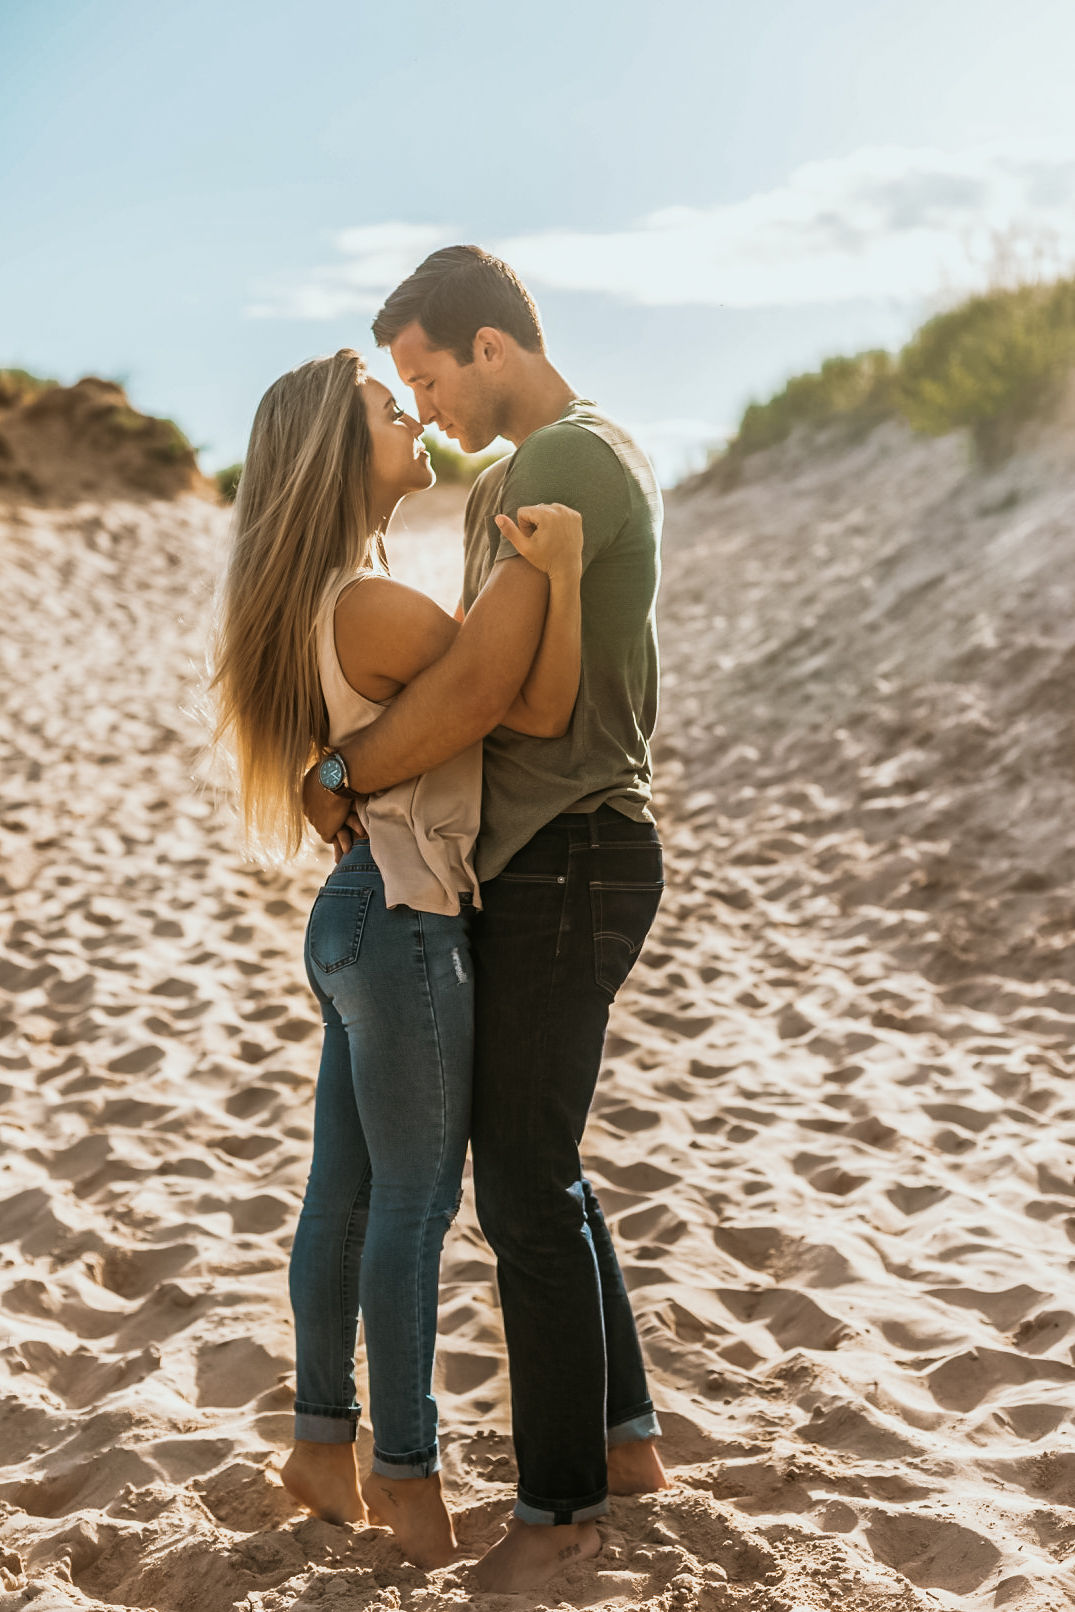 Sleeping Bear Sand Dunes National Lakeshore Couples Session, Photographs by Teresa, includes posing inspiration for an outdoor couples session. Book your Michigan couples session and browse the blog for more inspiration #couples #photography #couplesphotography #chicagophotographer